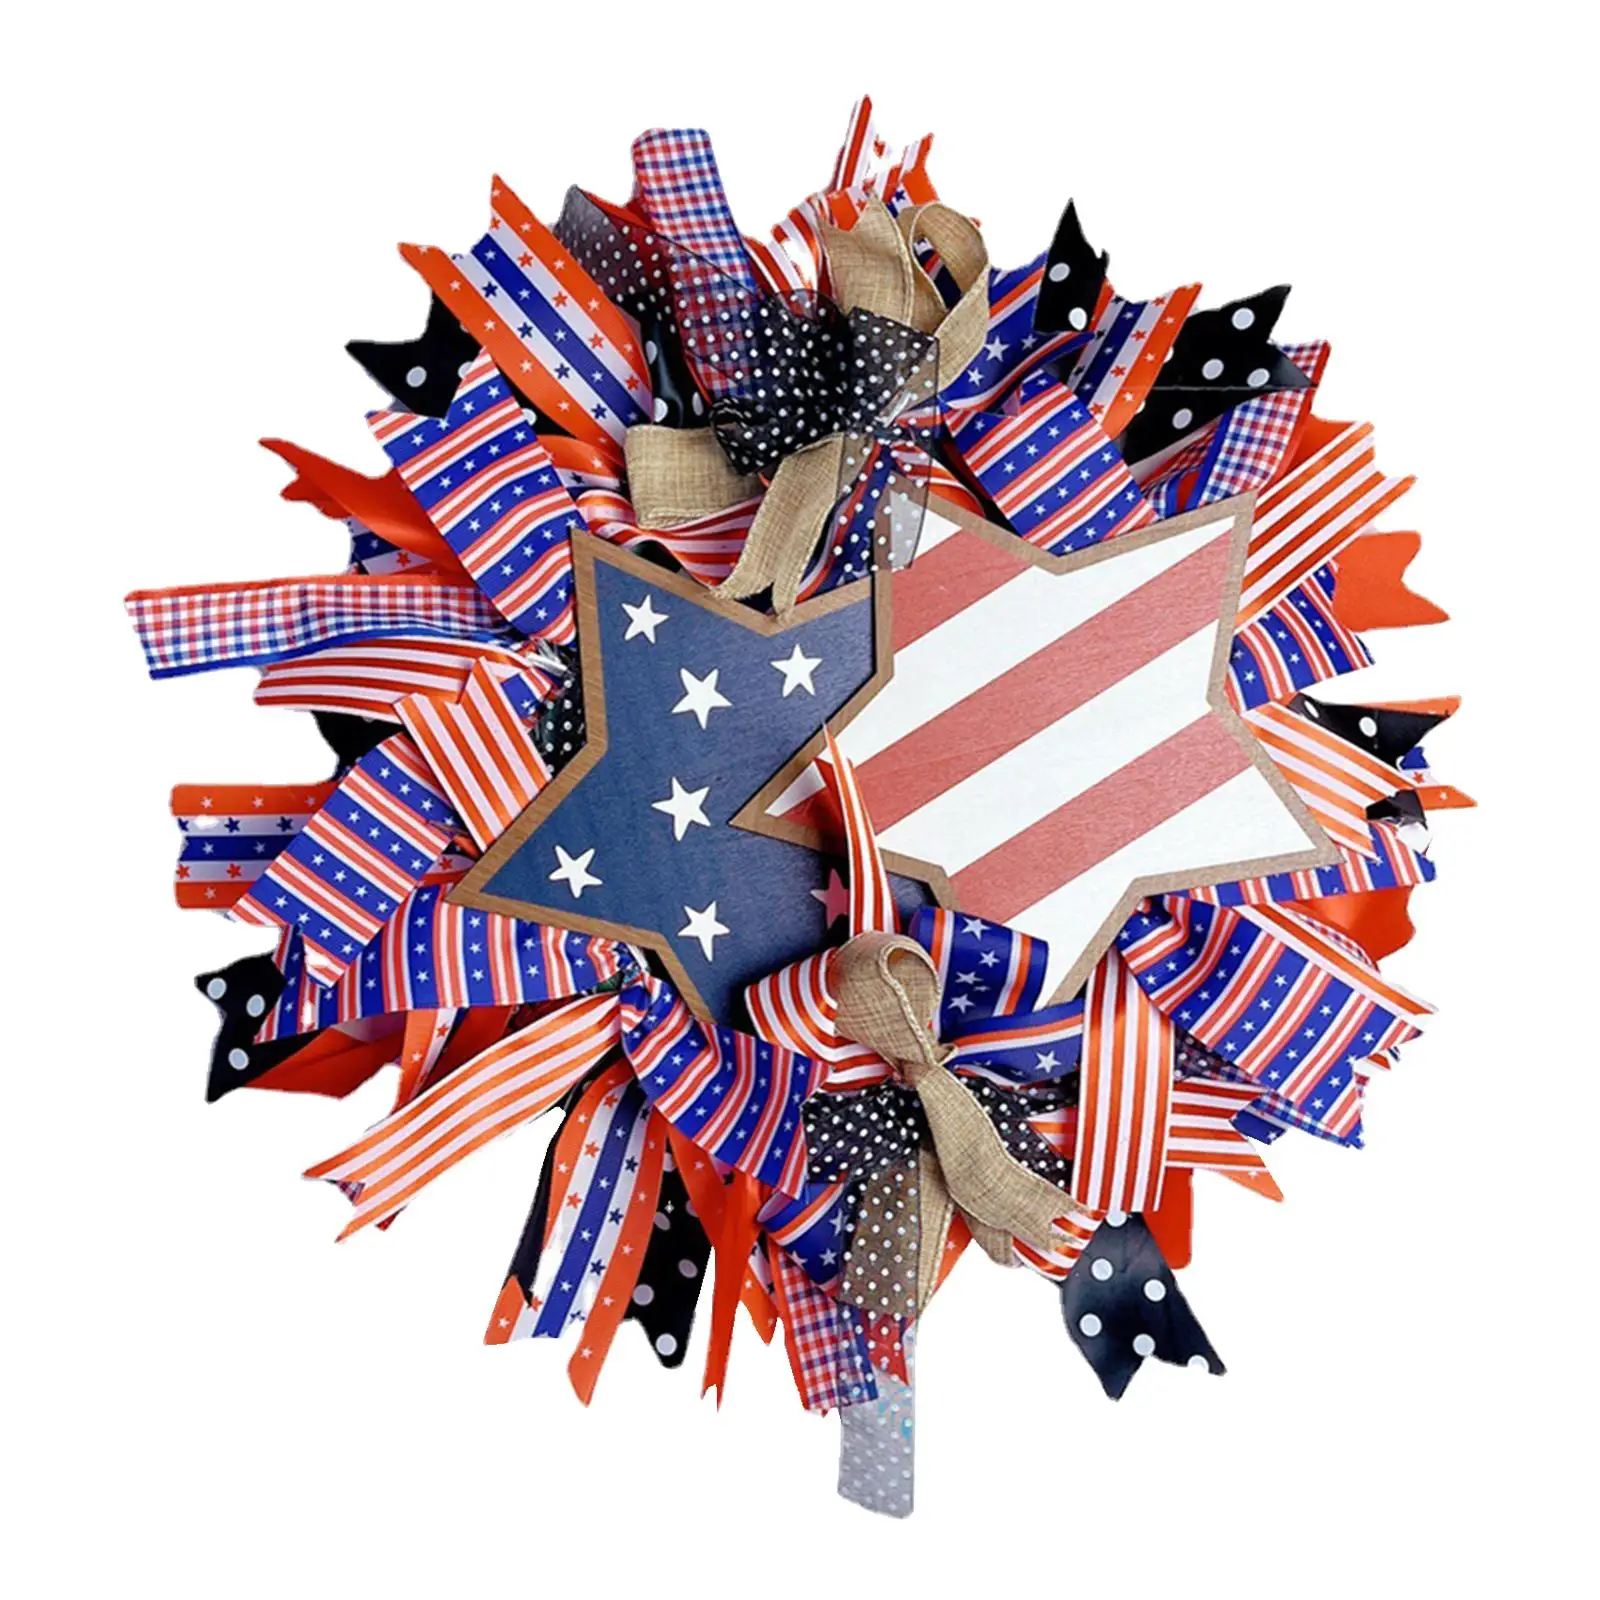 Independence Day Wreath Decorative Hanging Fourth of July Door Wreath Patriotic Wreath for Indoor Outdoor Wall Office Decoration